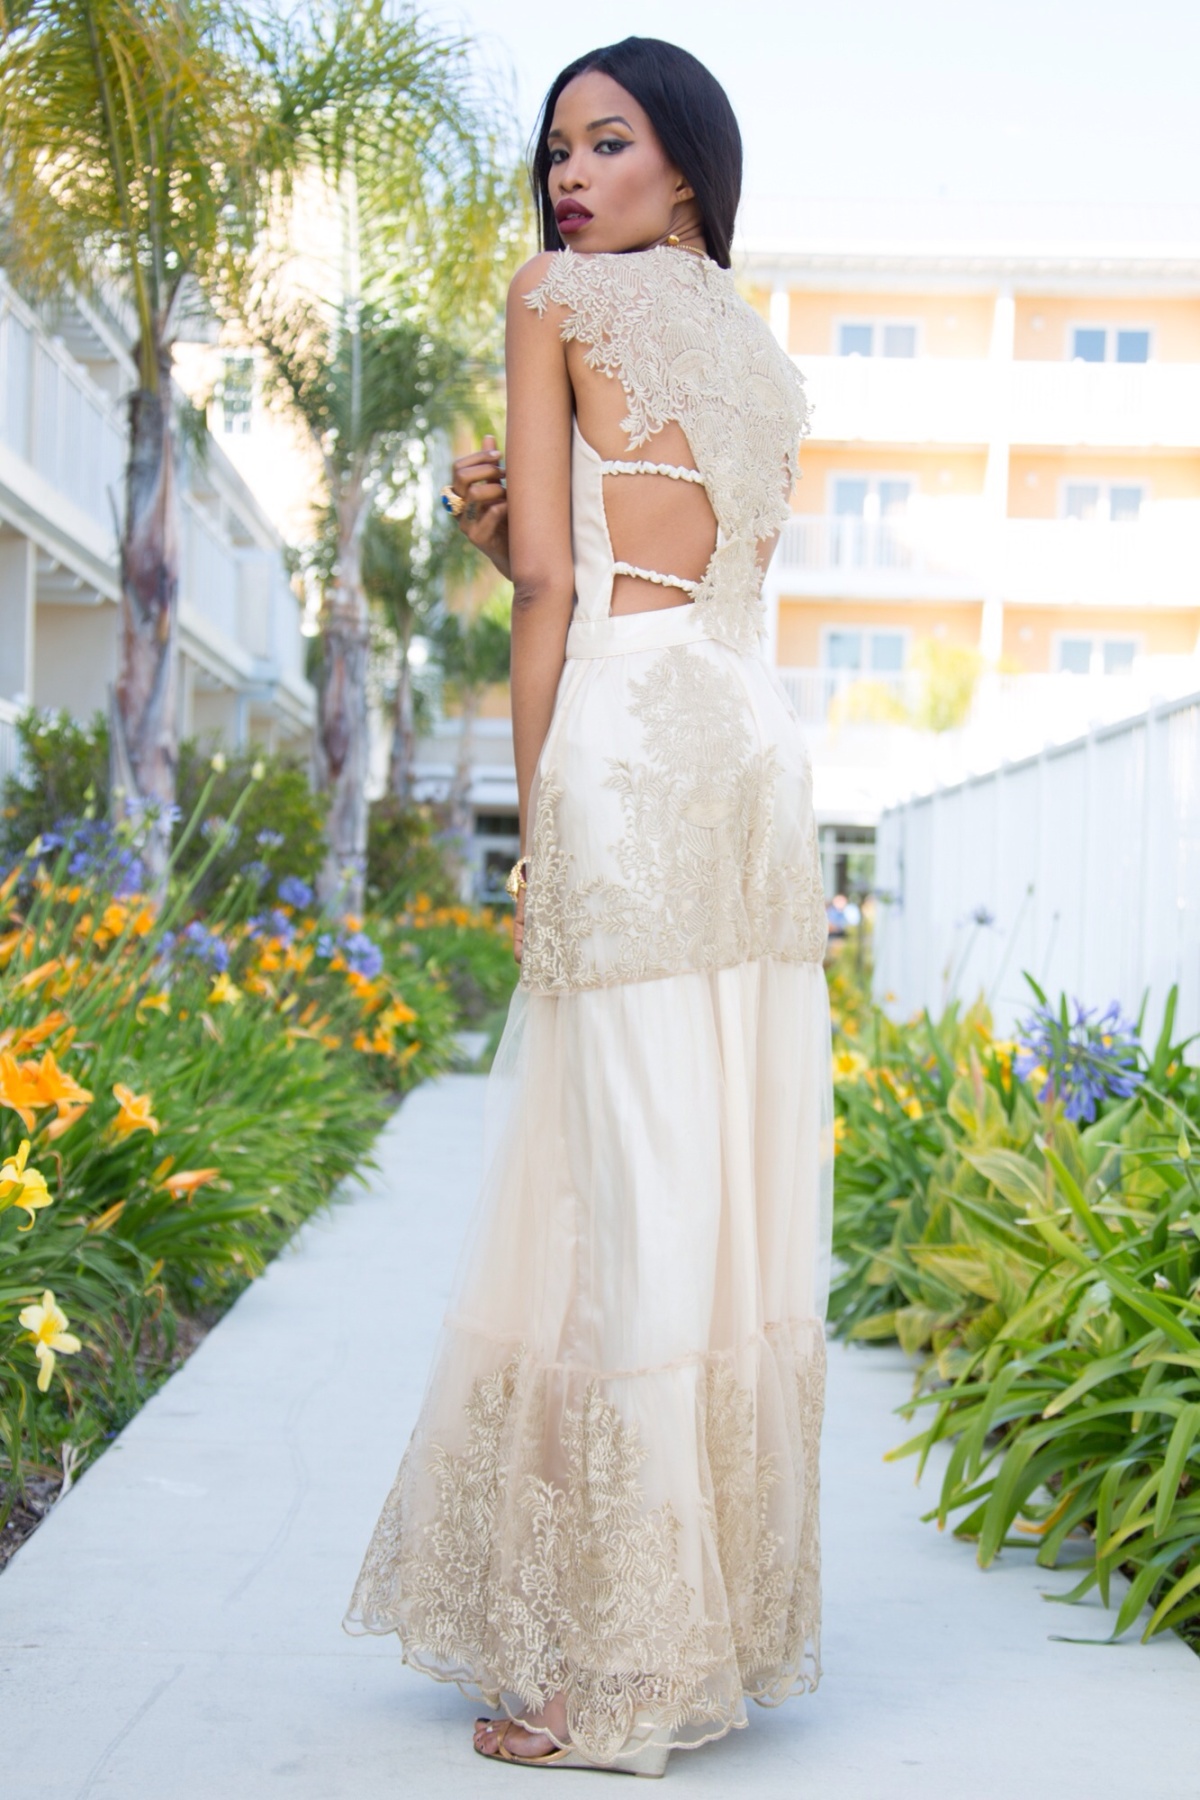 Sneak Peak: Vonne Couture “Sheer Fantasy” Bridal Couture Collection